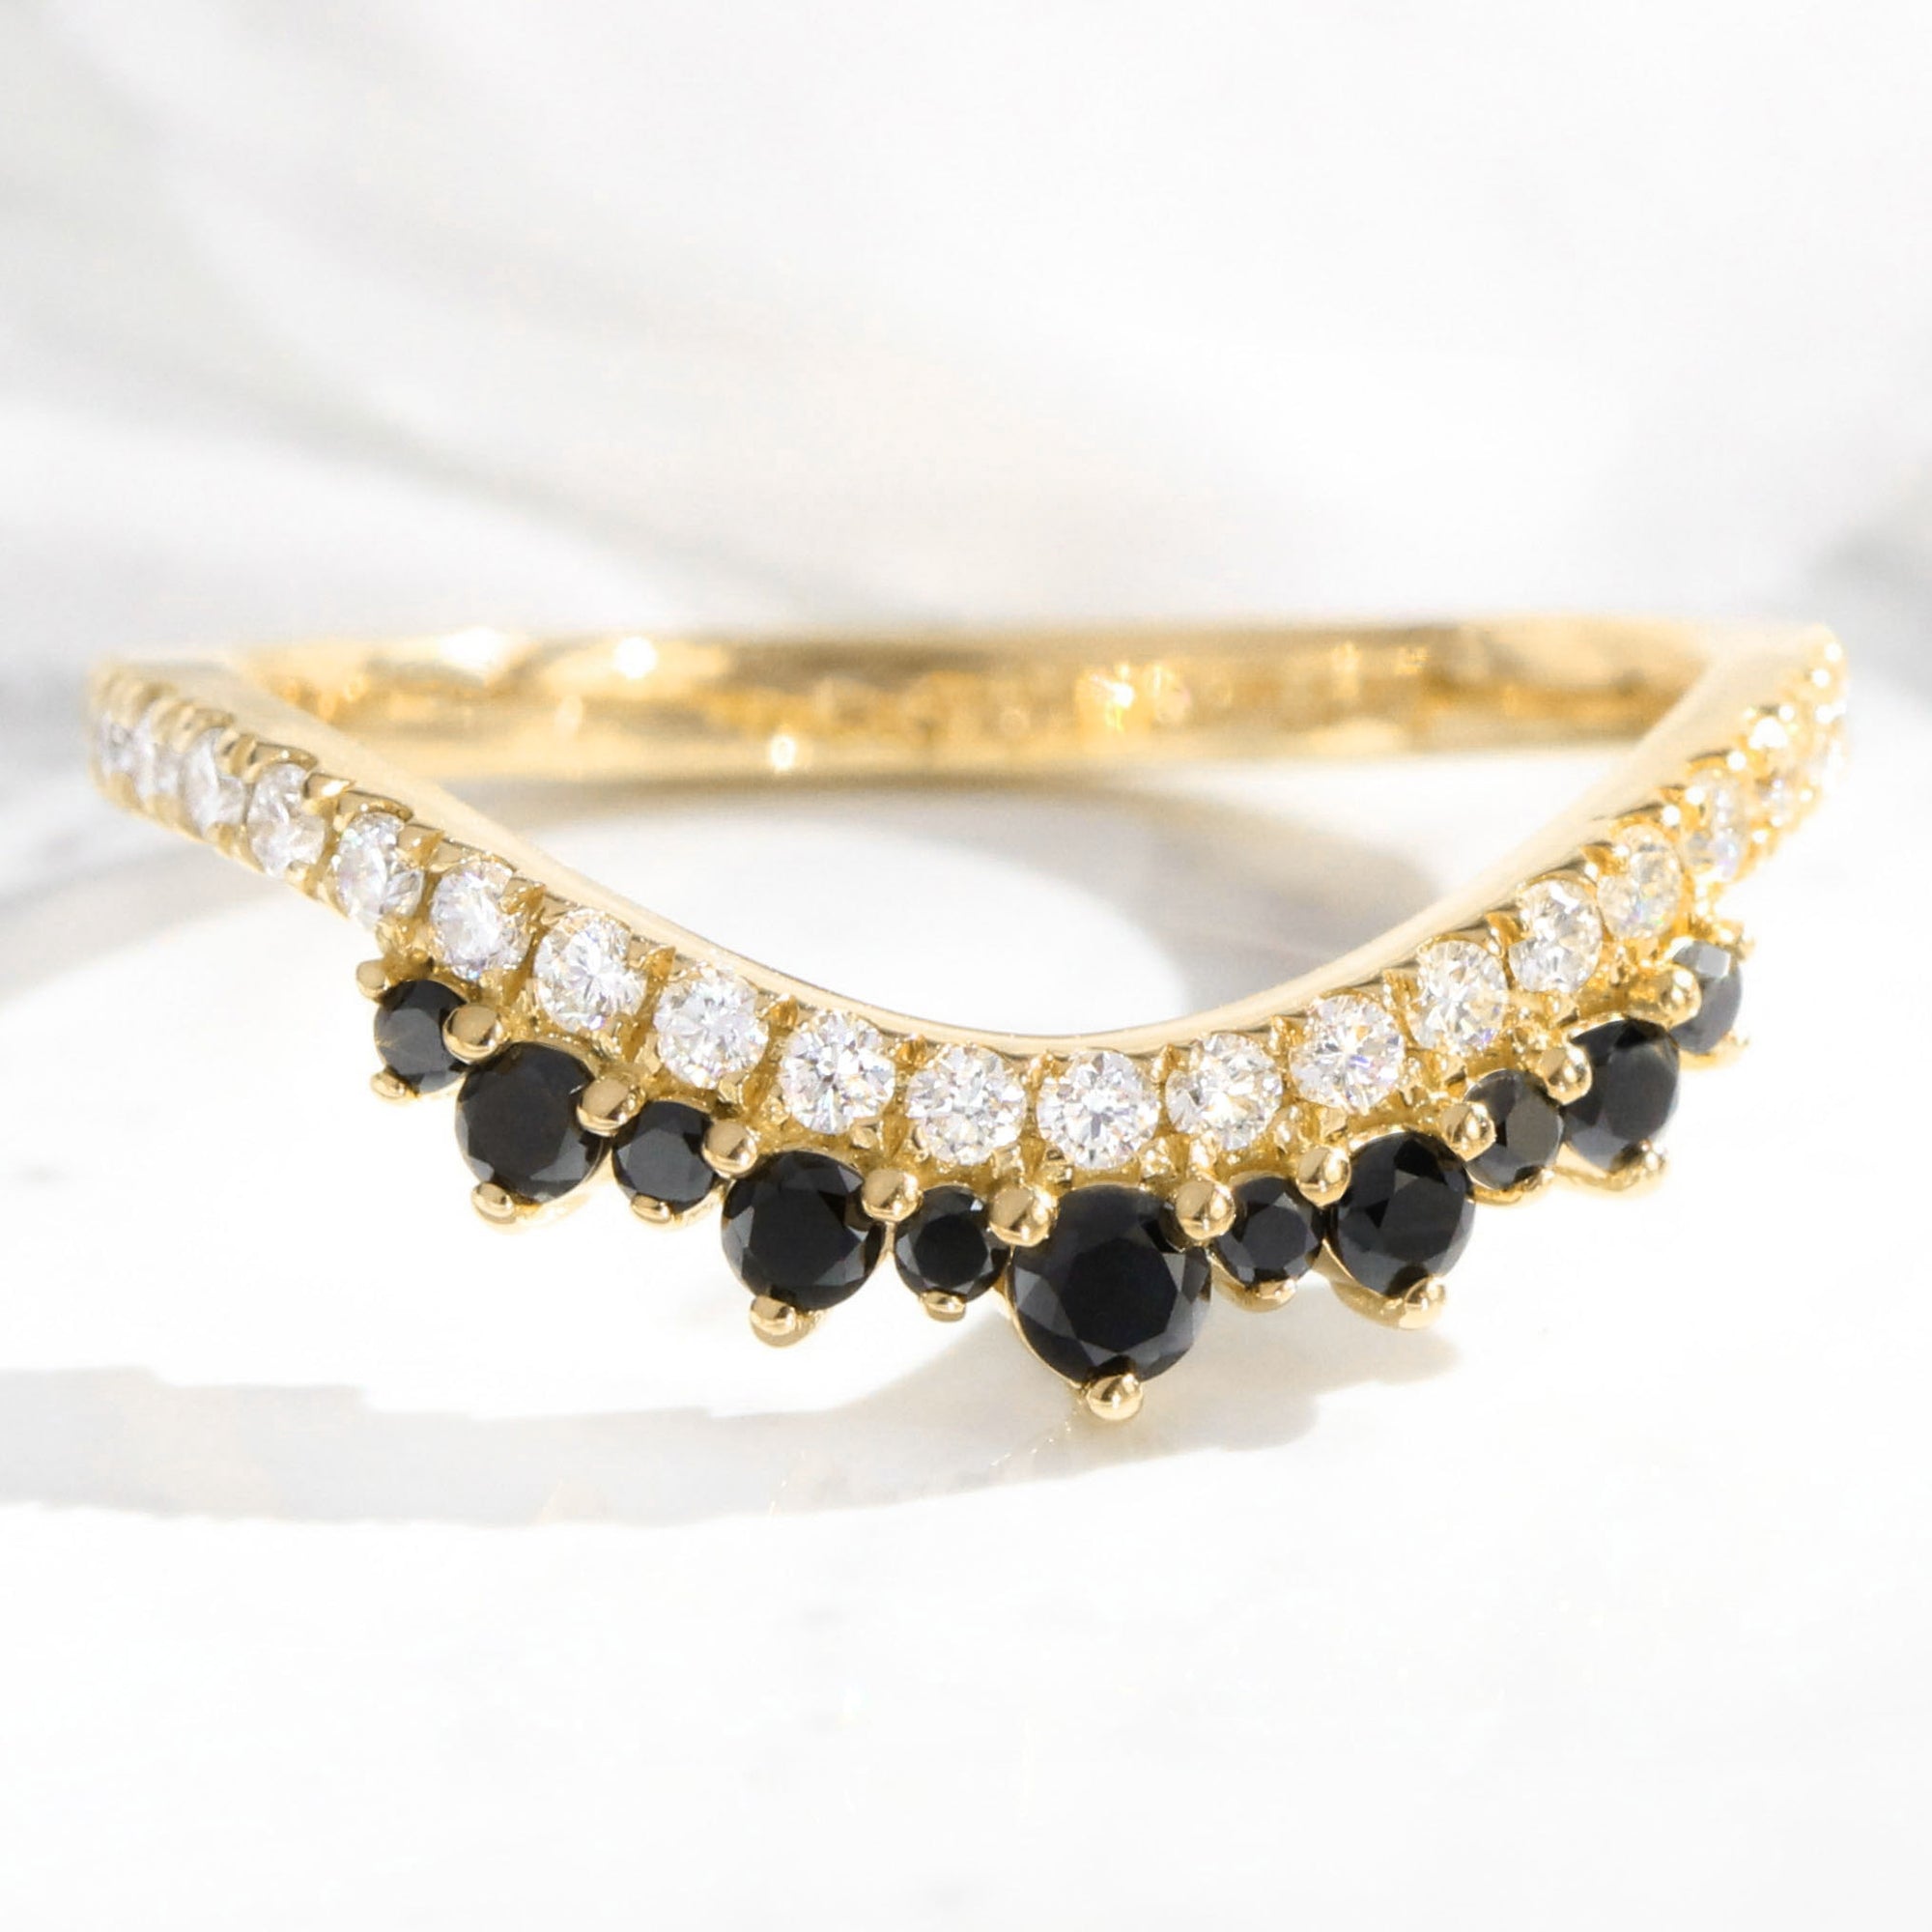 White and black diamond wedding ring yellow gold curved crown diamond band la more design jewelry